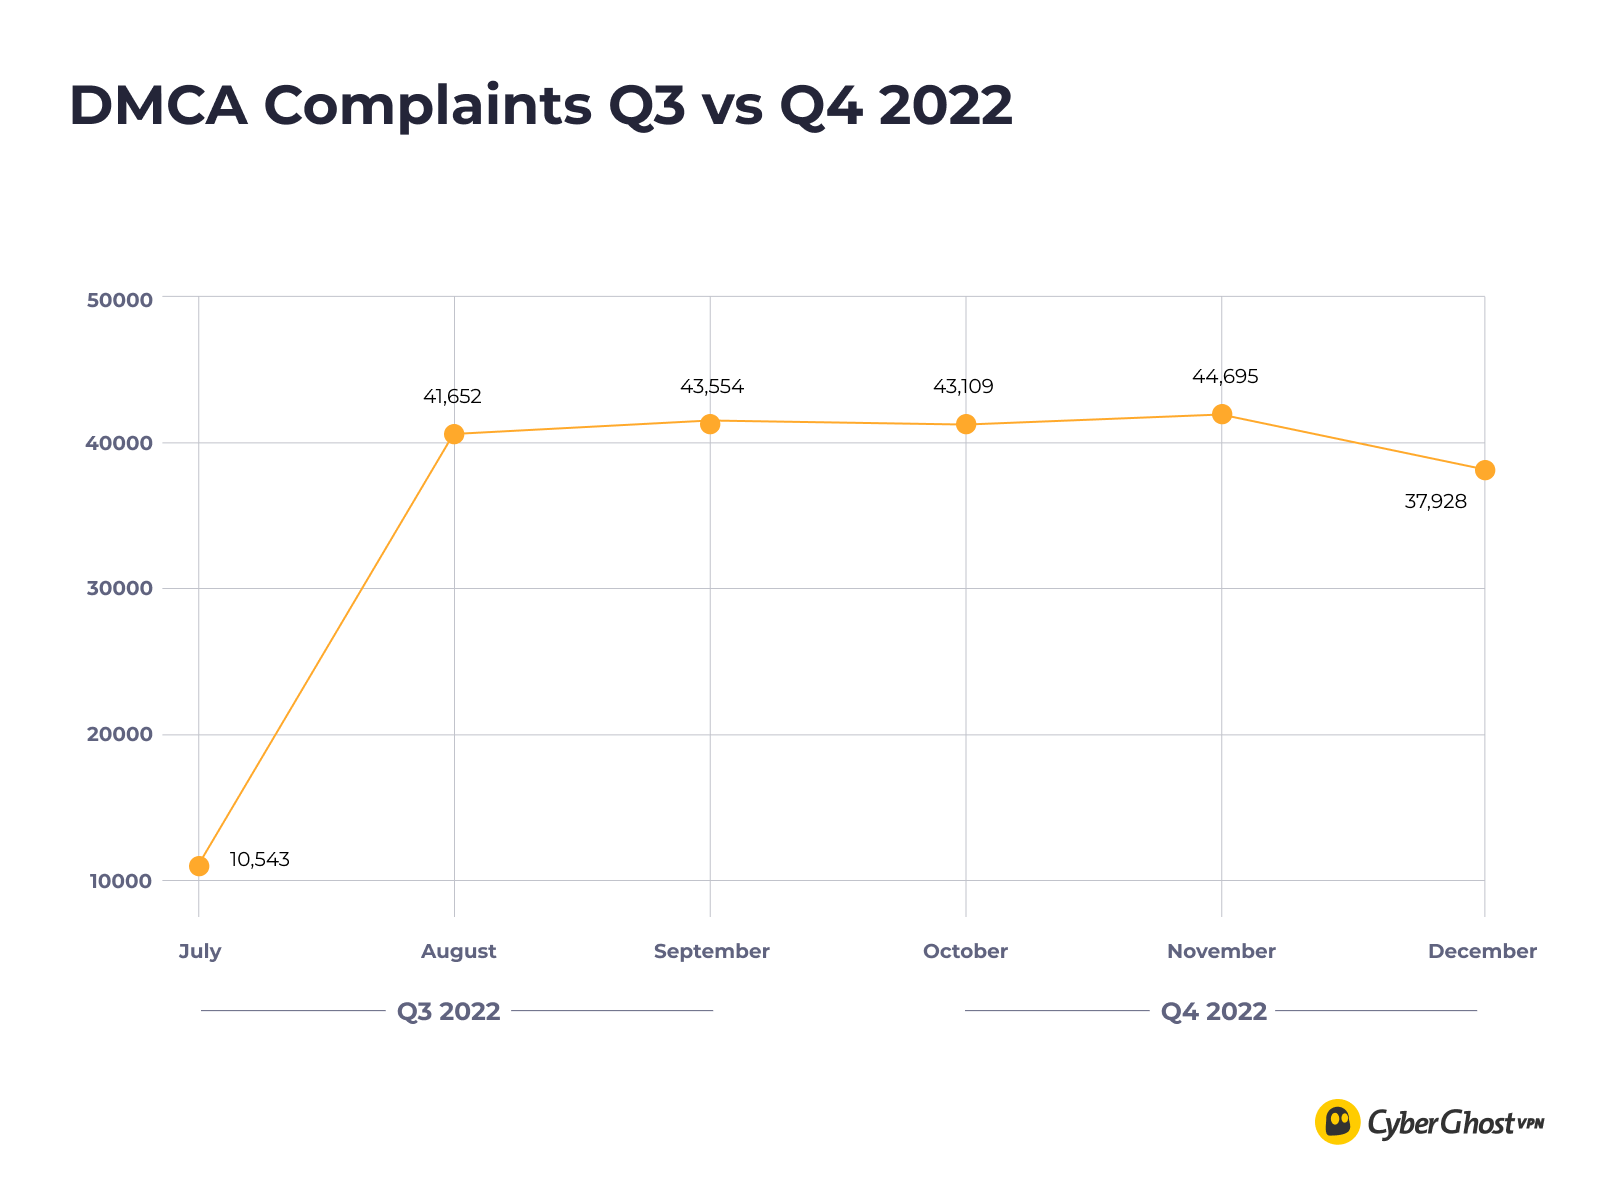 CyberGhost VPN's Quarterly Transparency Report numbers for DMCA Complaints Q4 2022